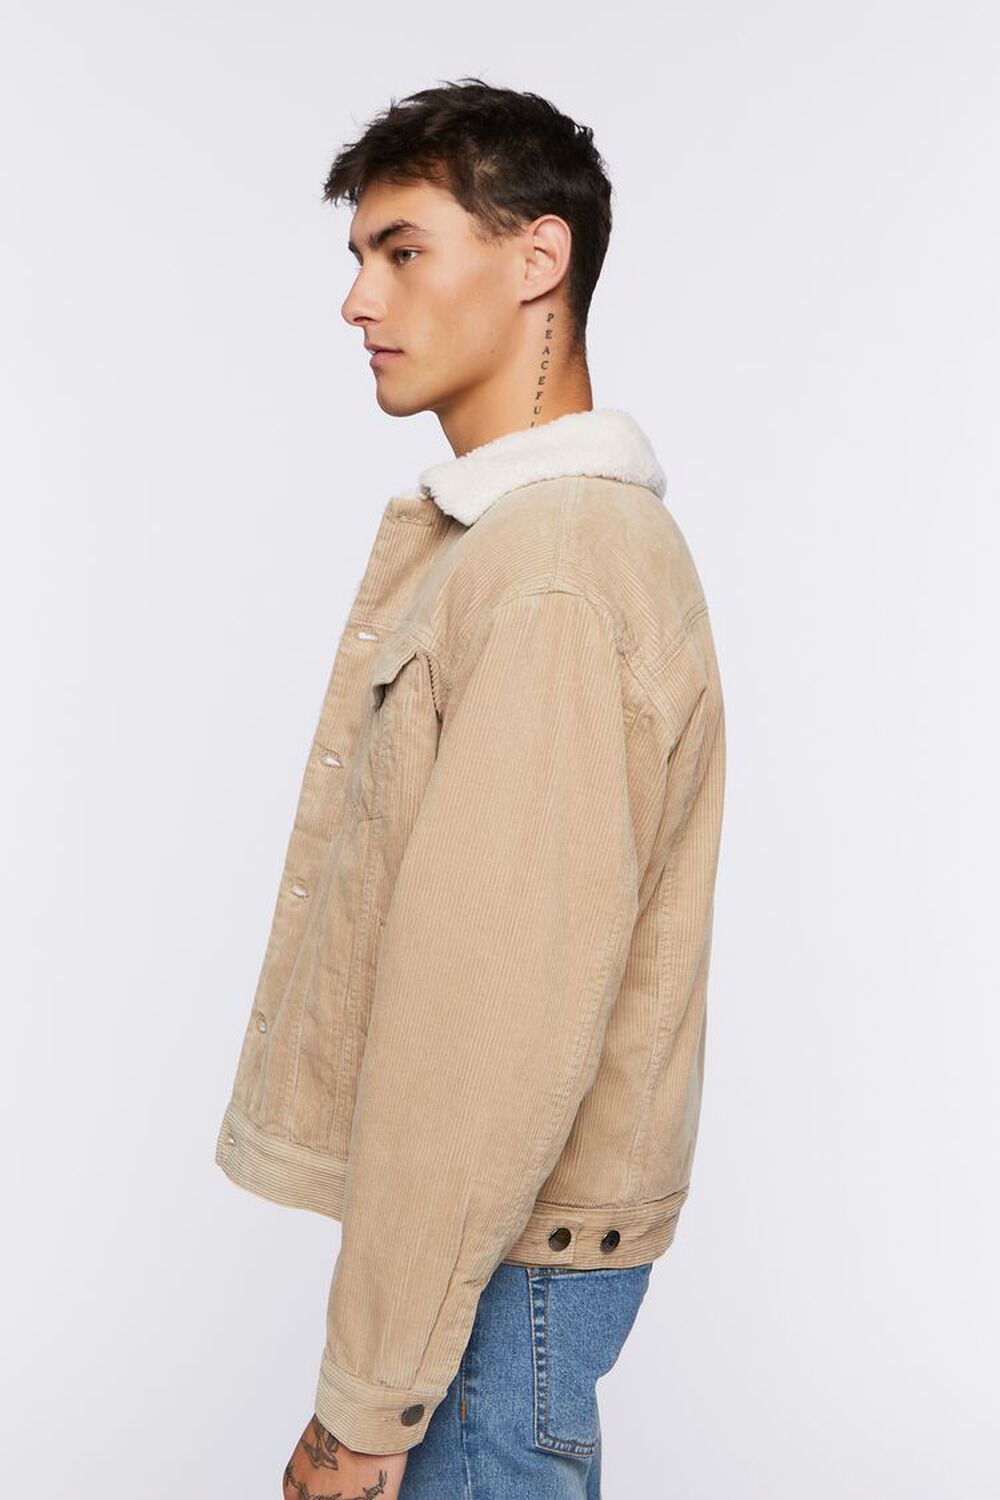 TAUPE/CREAM Corduroy Faux Shearling Trucker Jacket, image 3